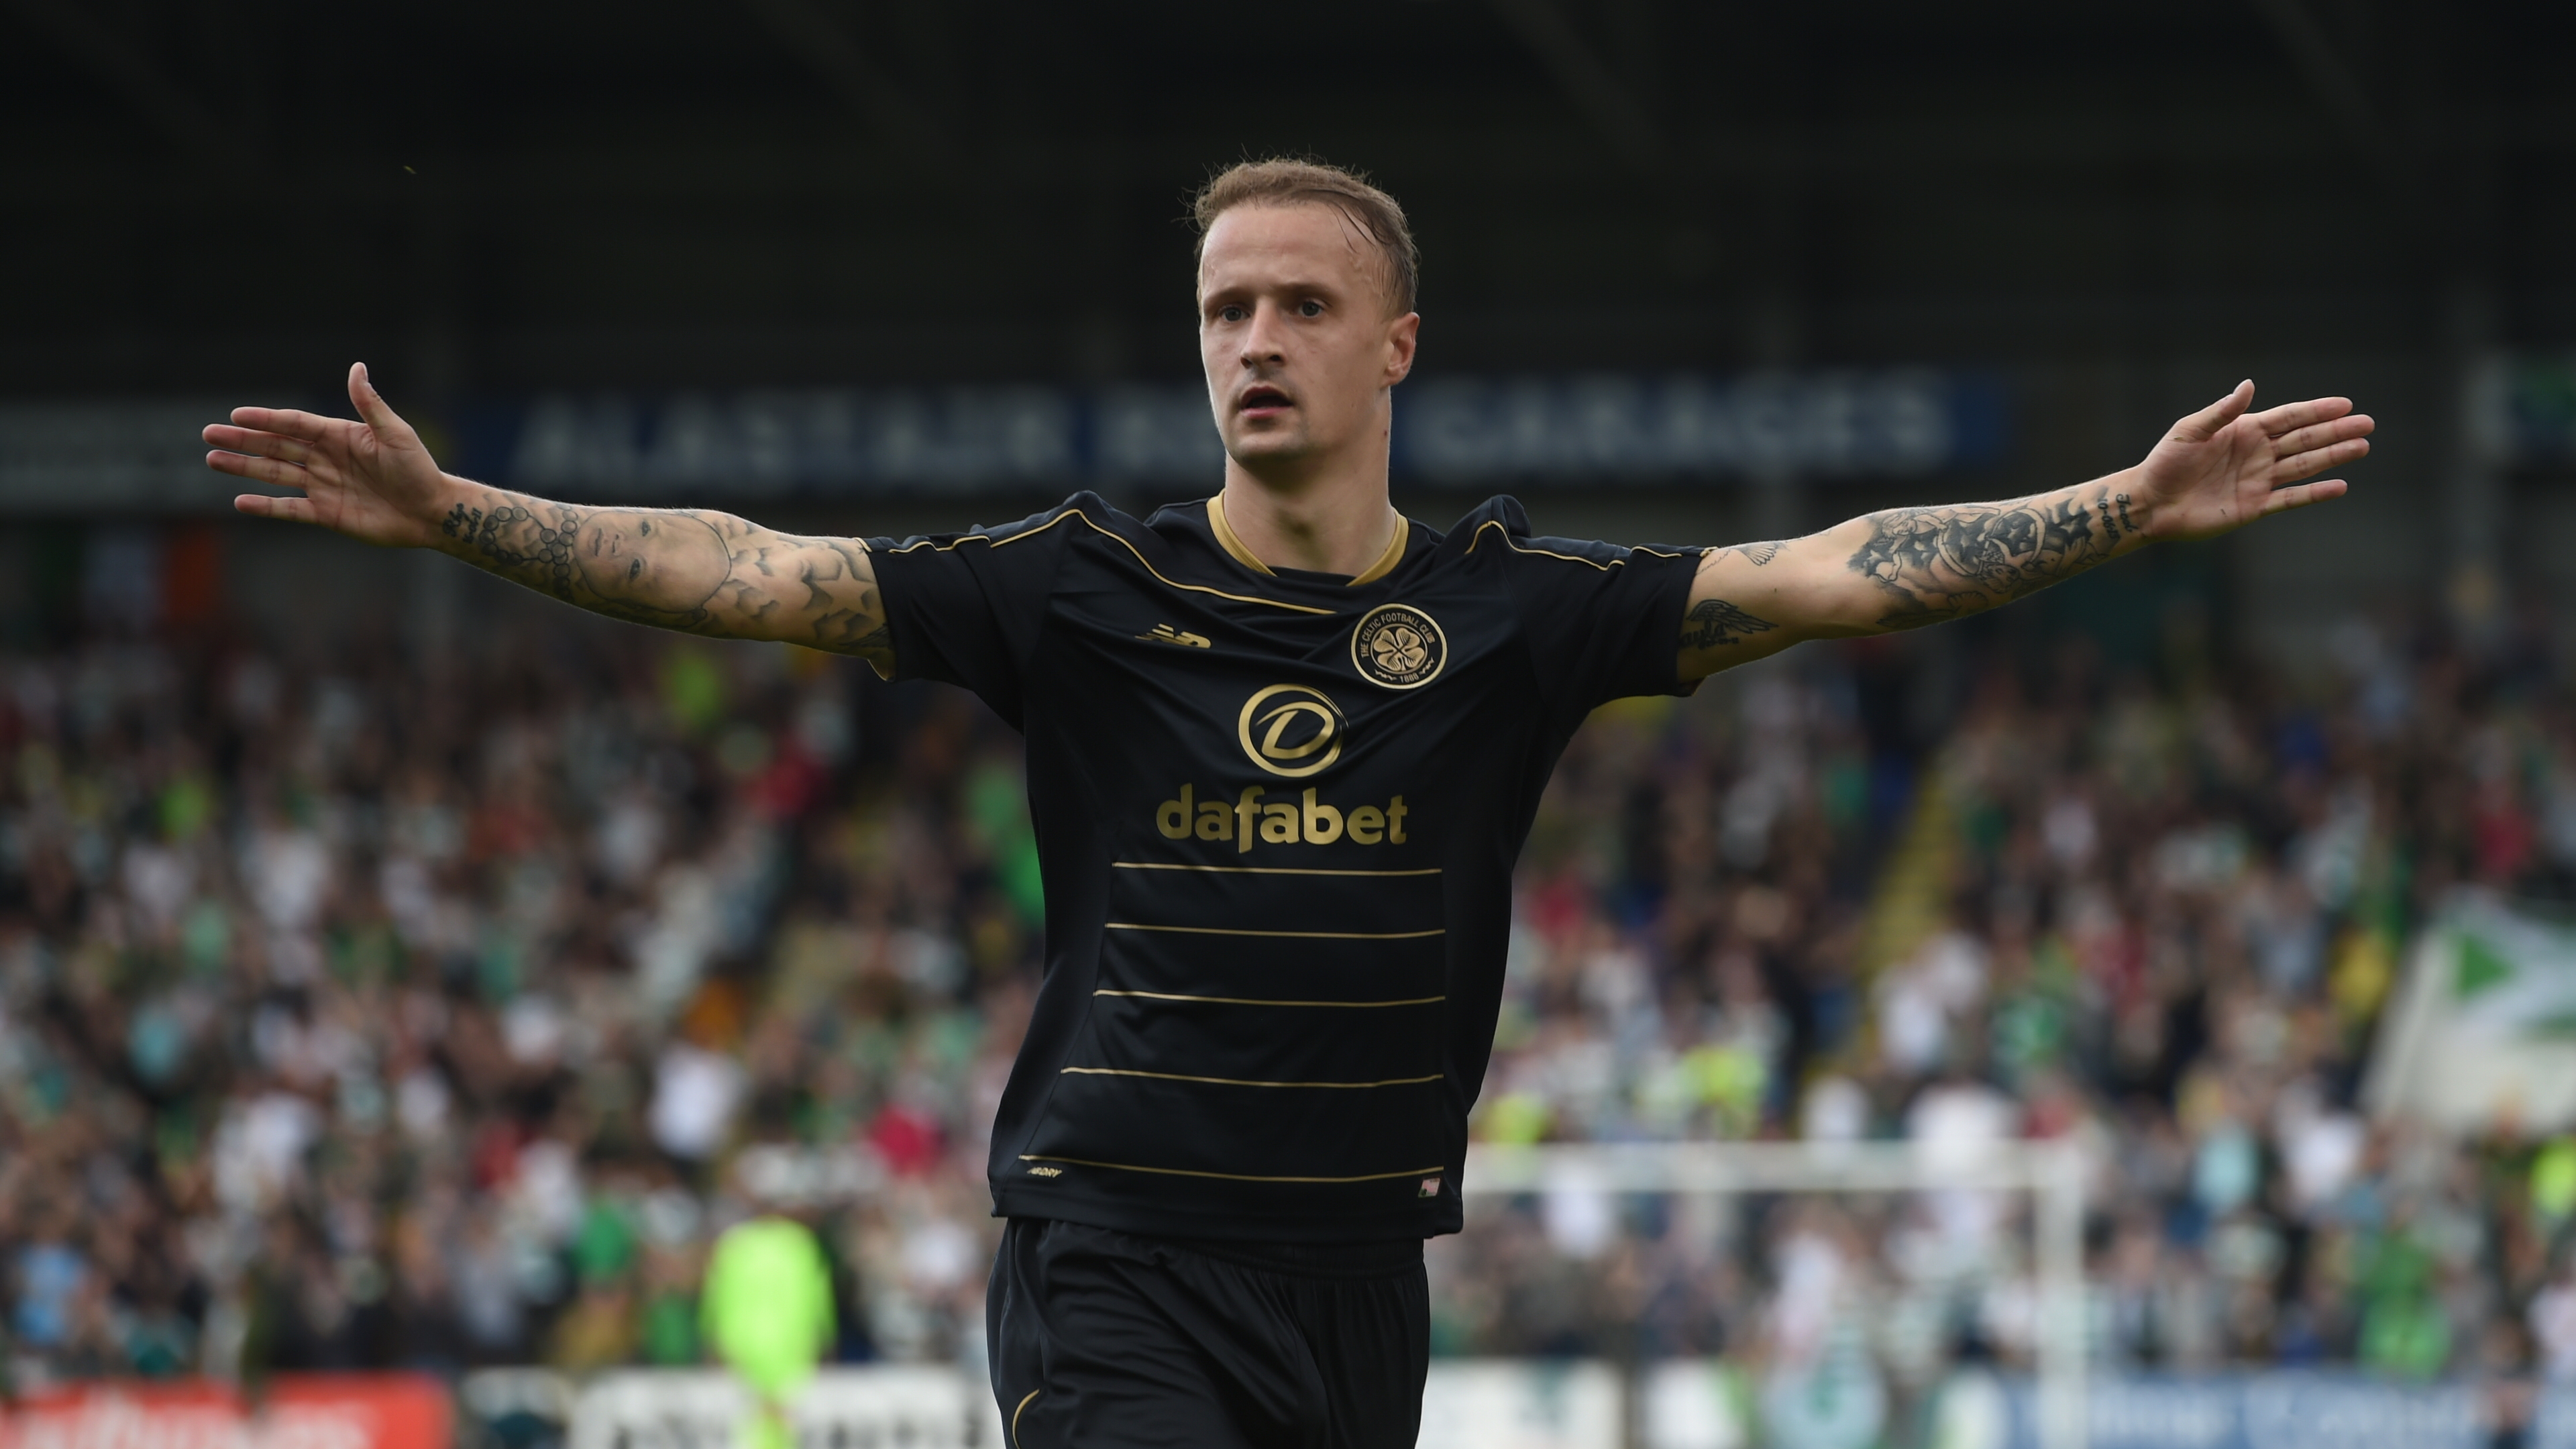 Another goal for Leigh Griffiths.